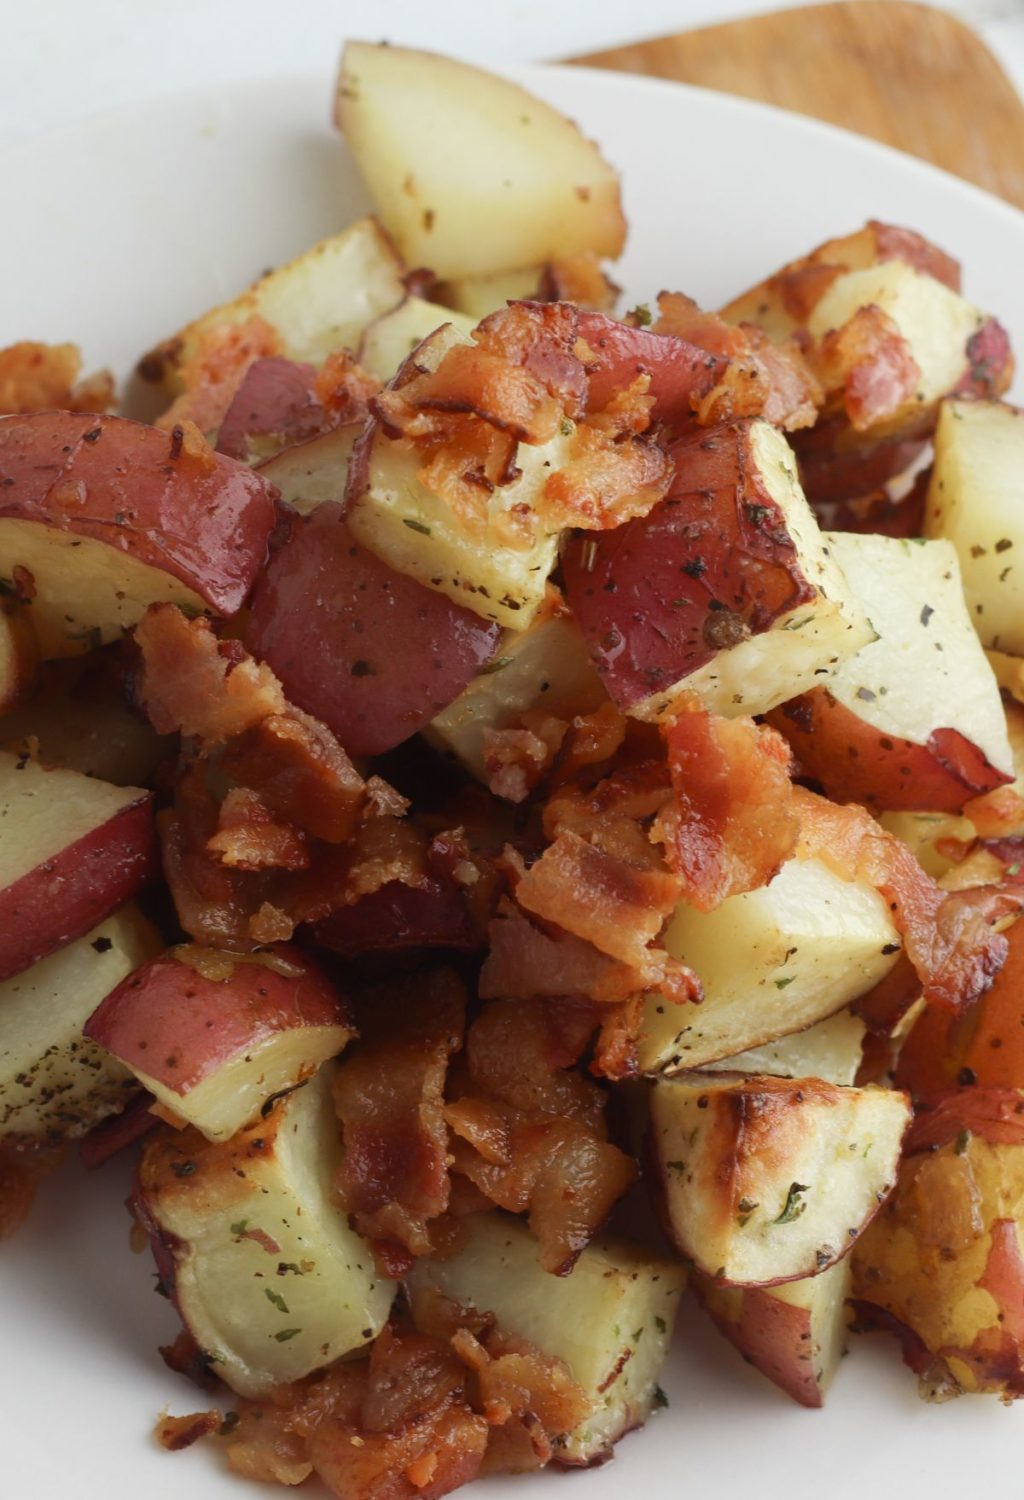 Potatoes with bacon and herbs on a plate.